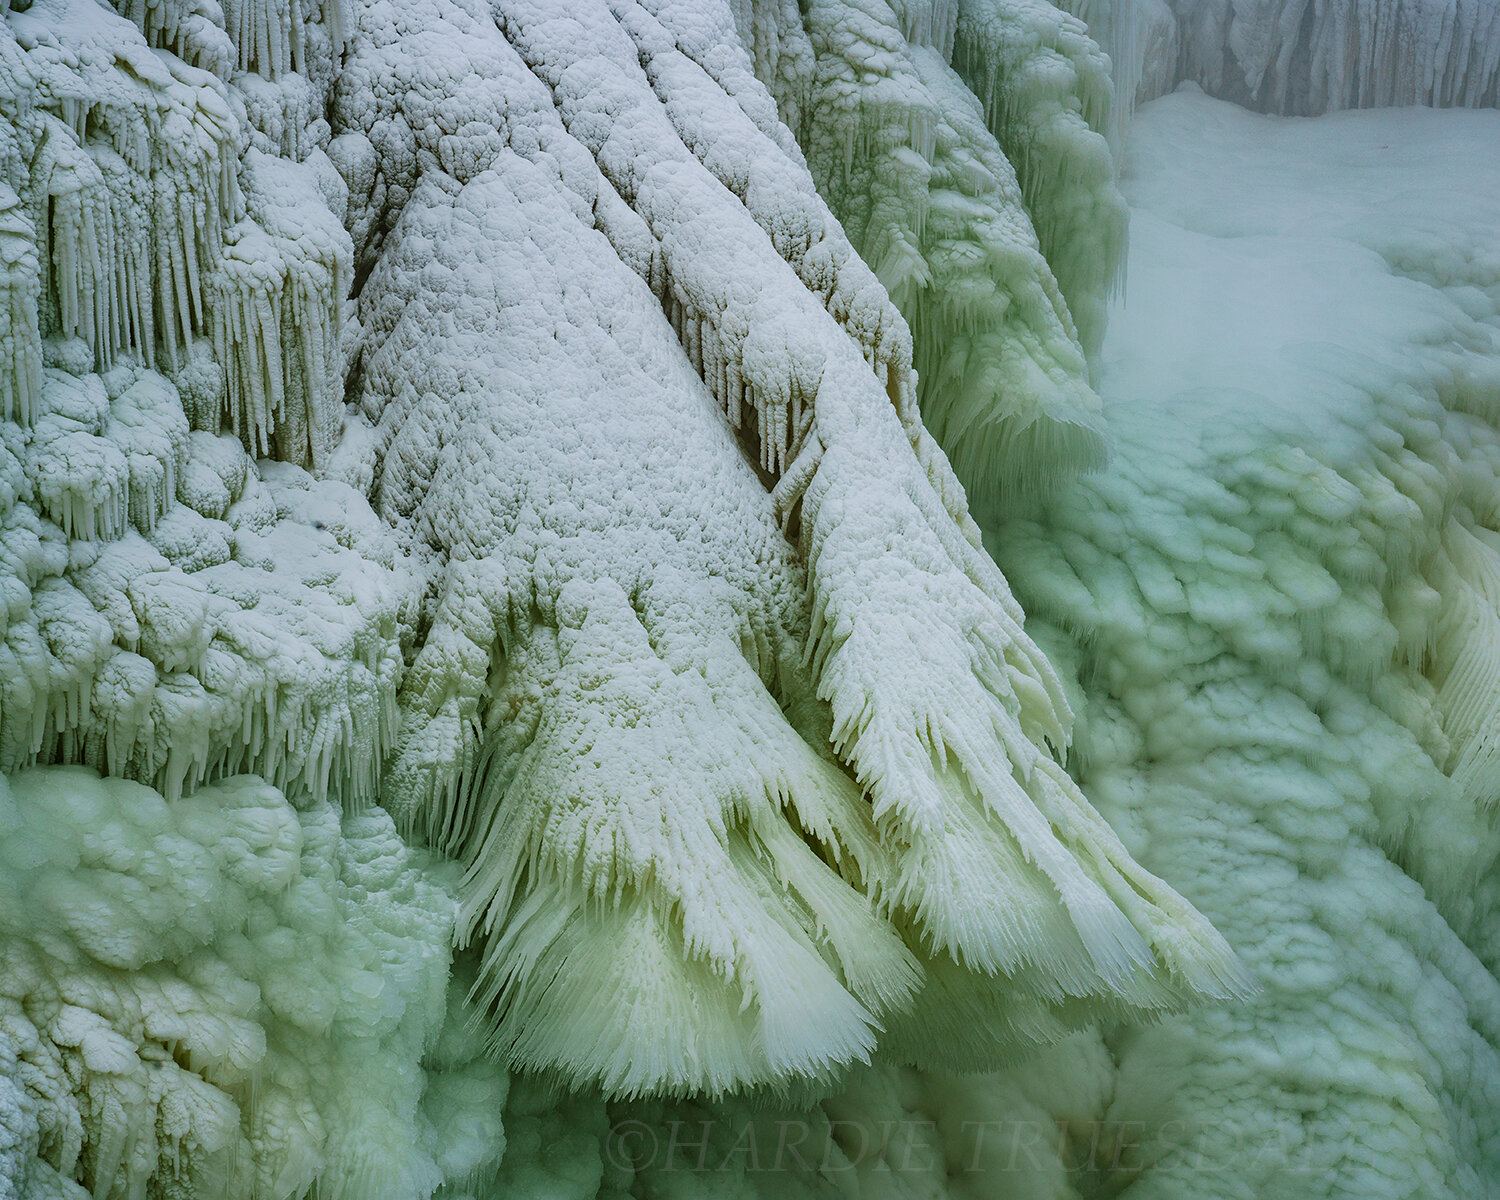 WNY#70 Ice Formations, Lower Falls, Letchworth State Park, NY